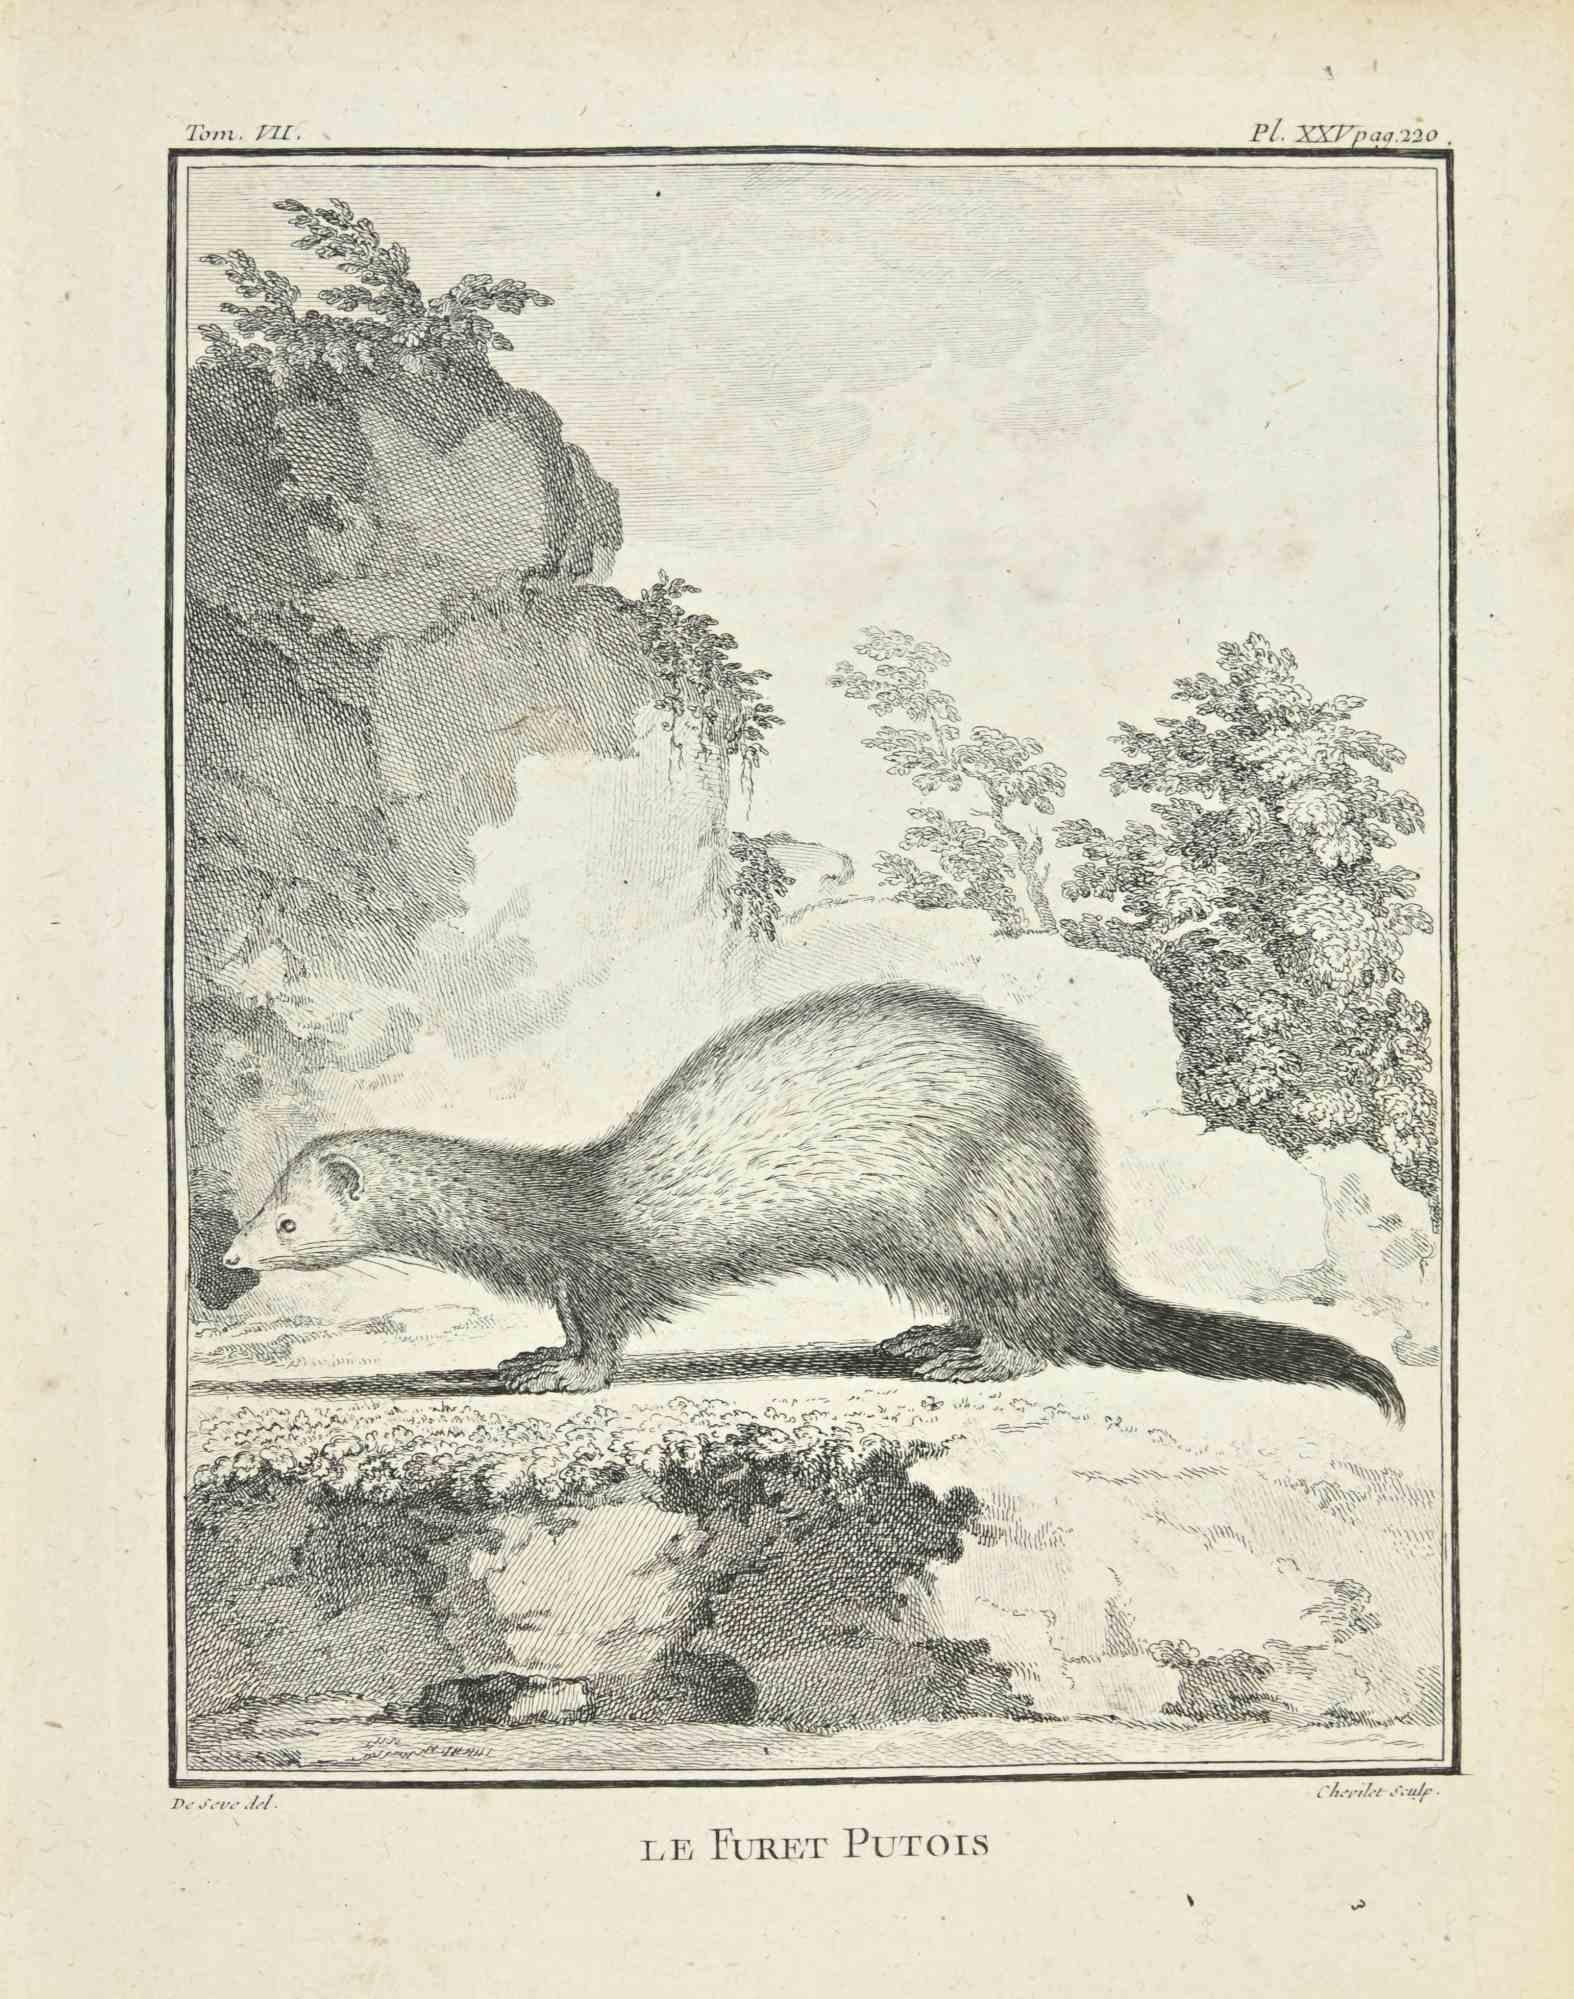 Le Furet Putois is an etching realized by Juste Chevillet in 1771.

It belongs to the suite "Histoire Naturelle de Buffon".

The Artist's signature is engraved lower right.

Good conditions.